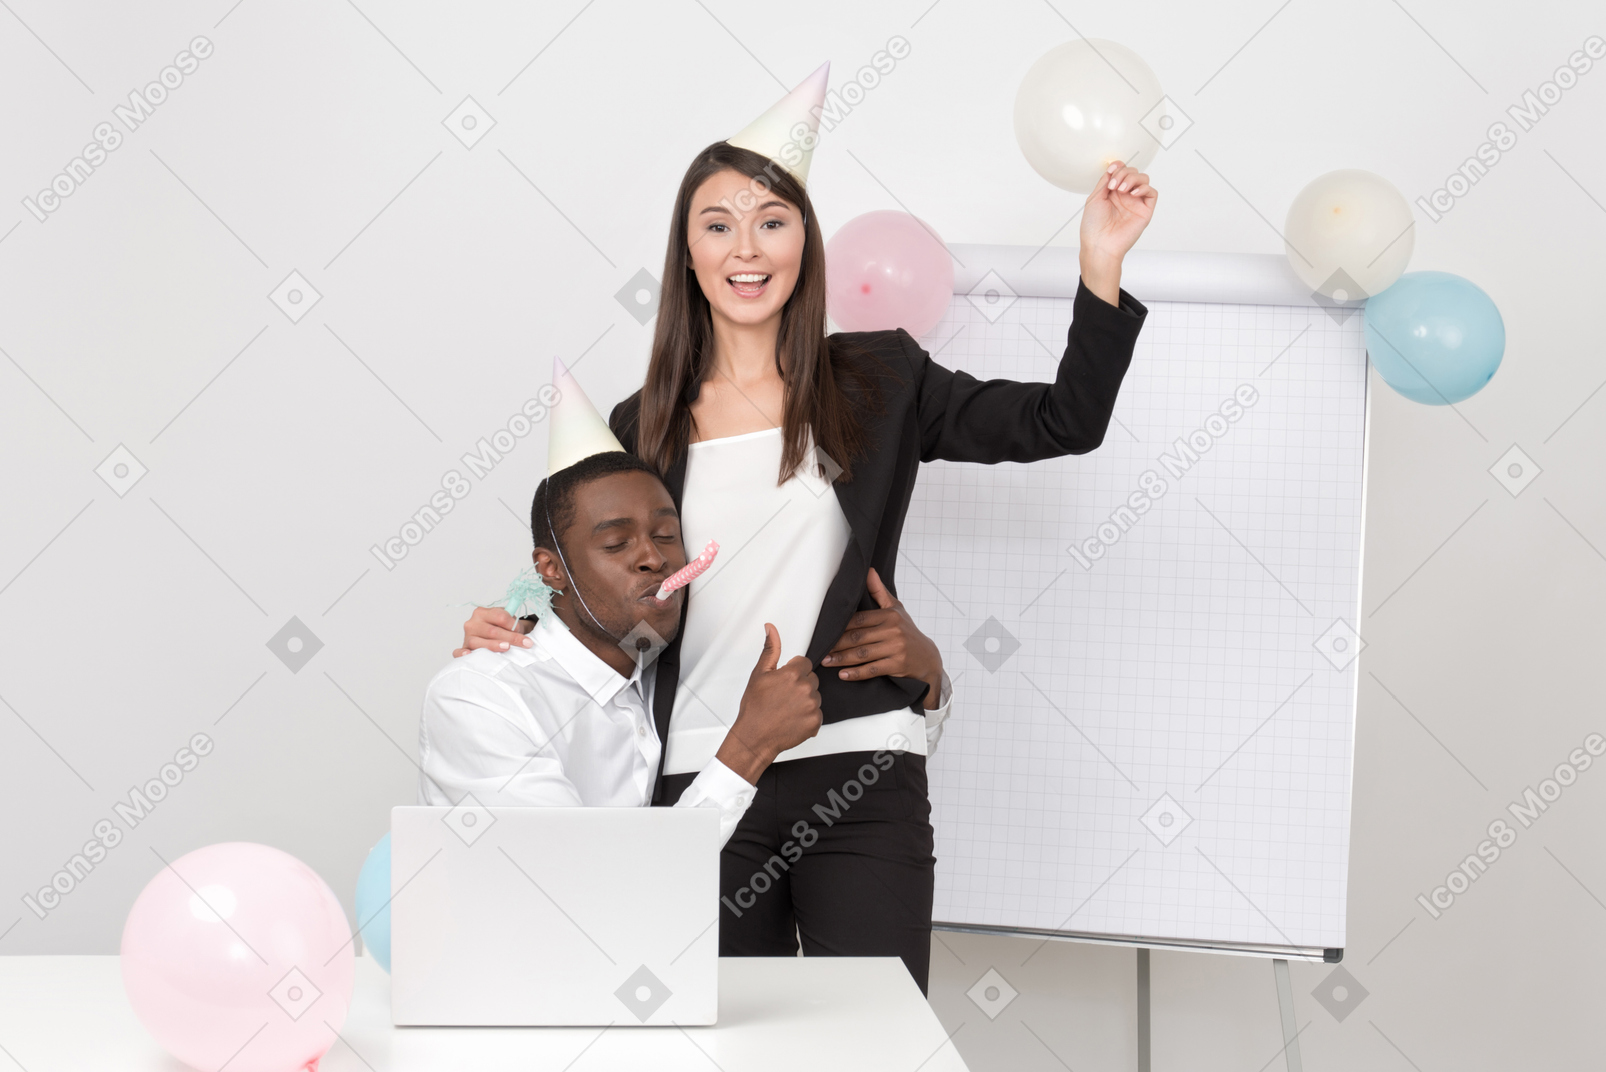 Happy to work and celebrate together